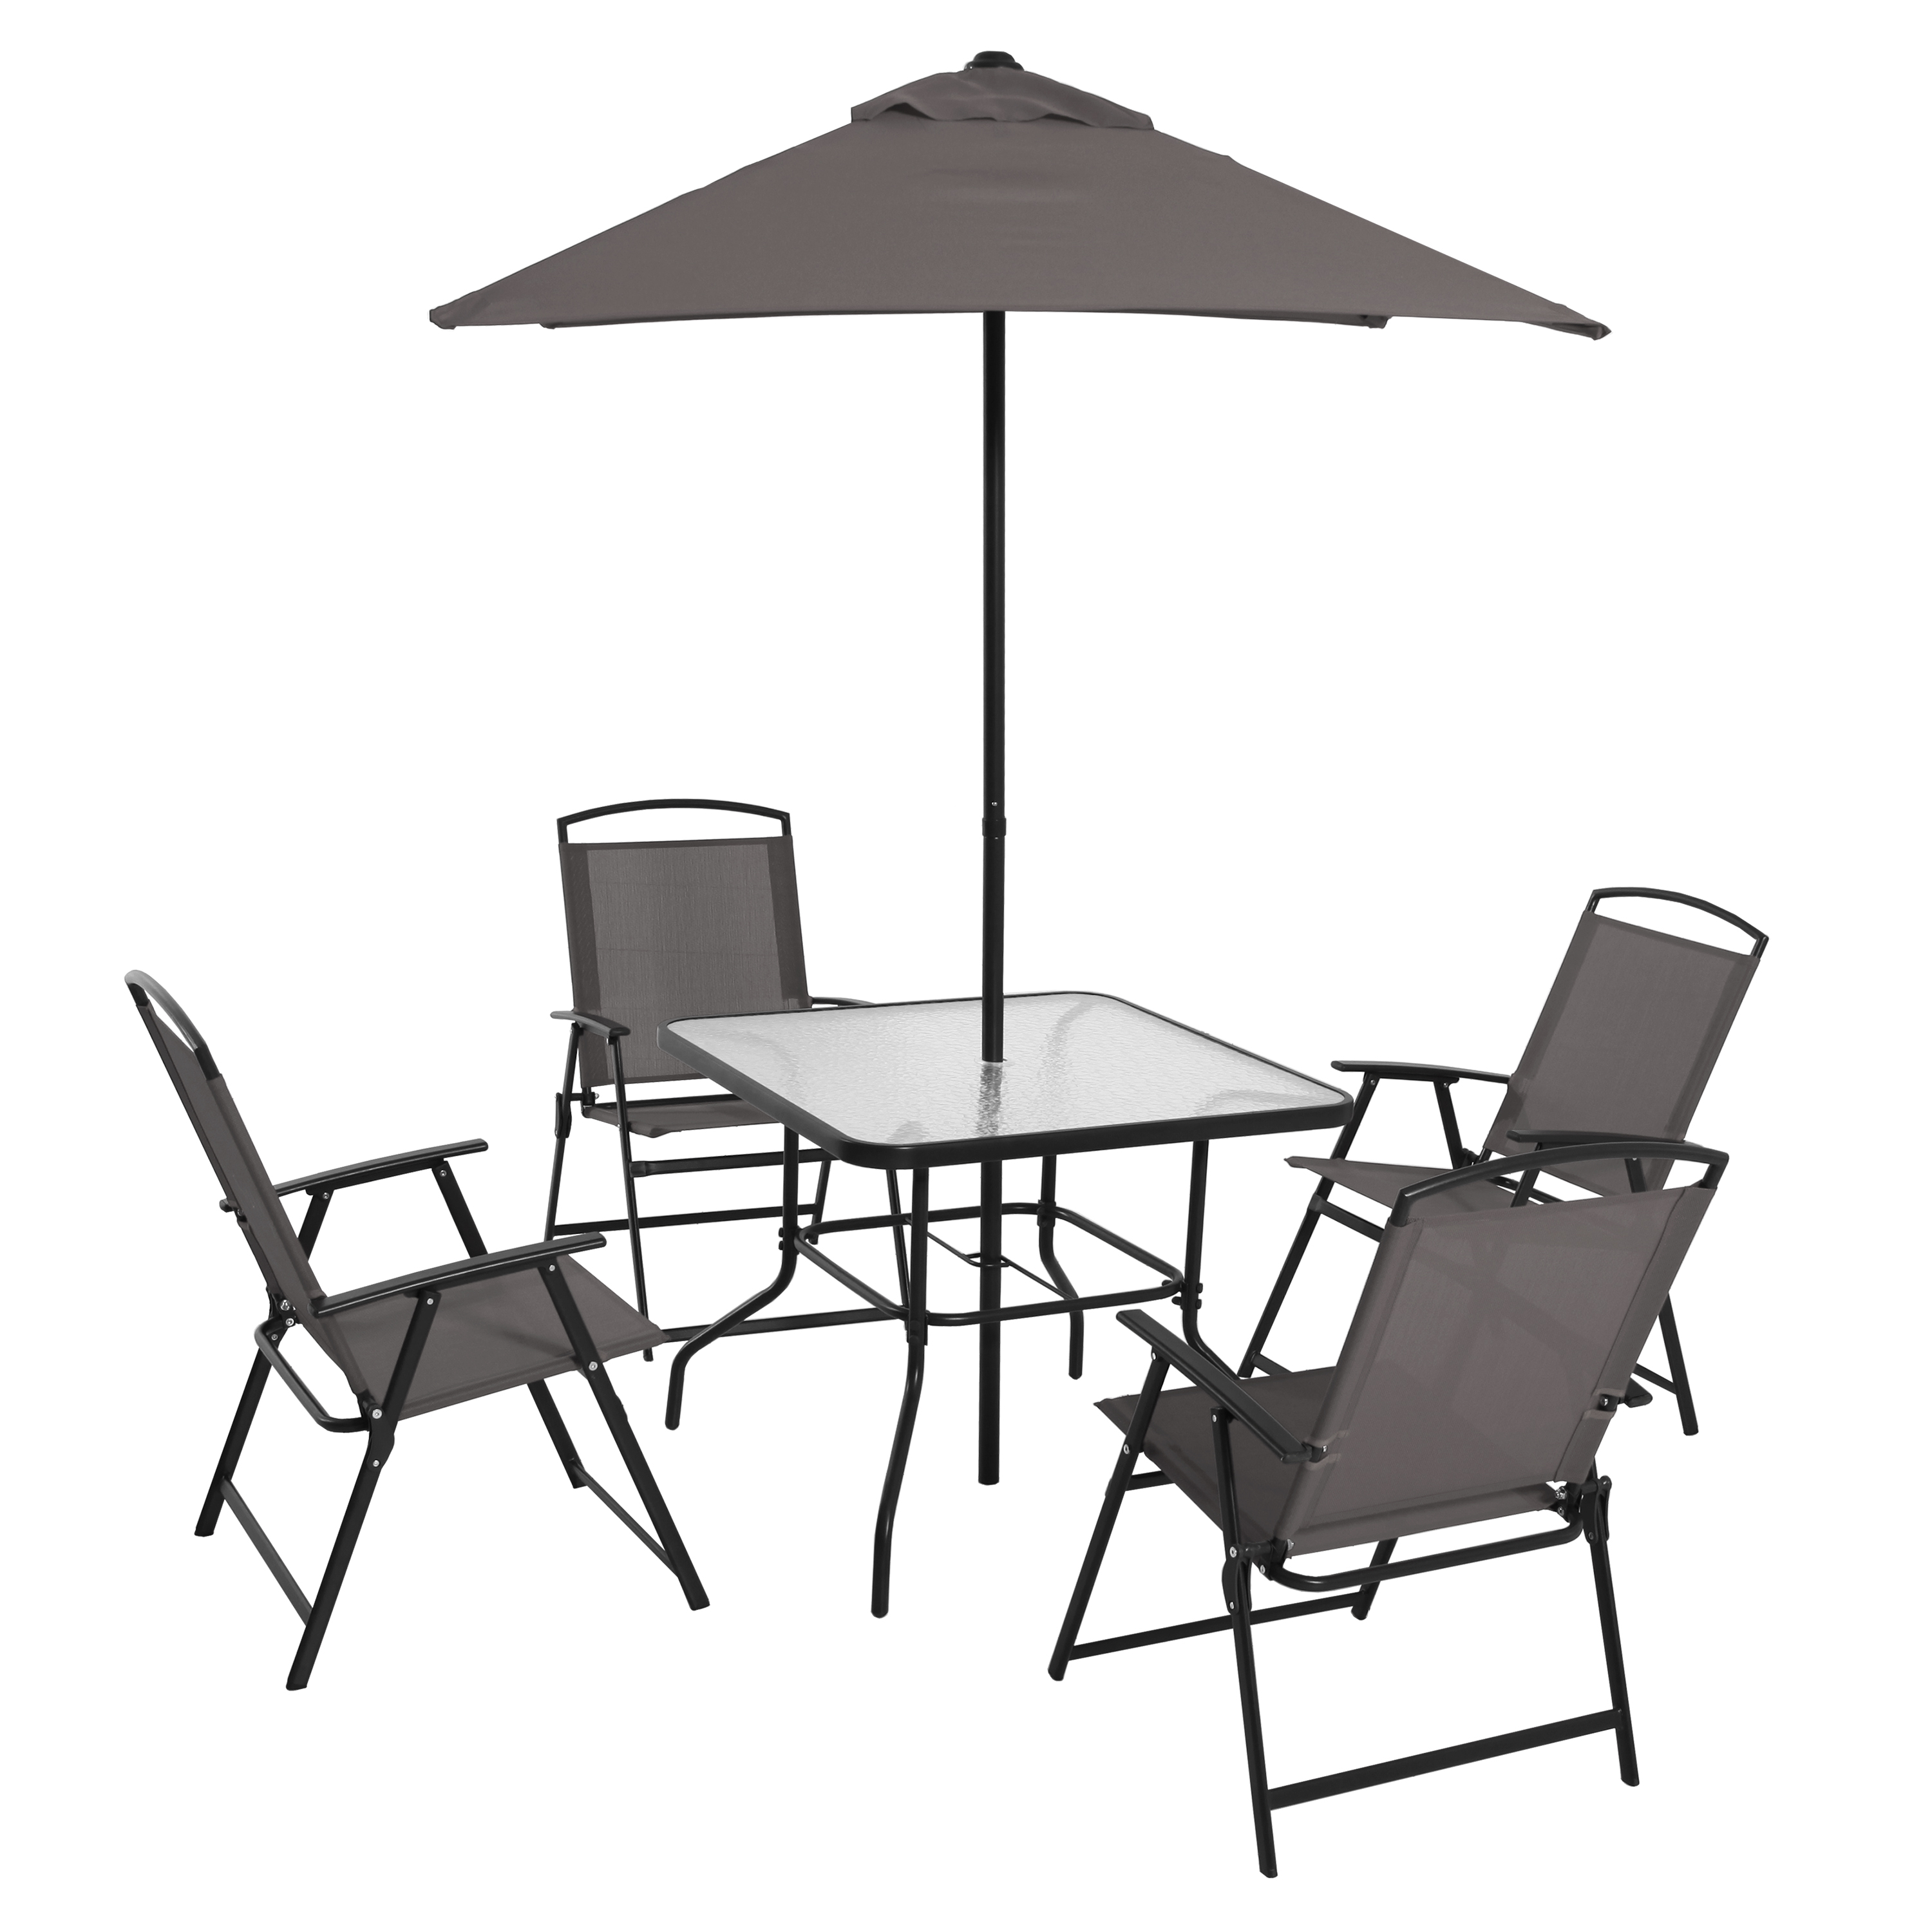 Mainstays Albany Lane 6-Piece Outdoor Patio Dining Set, Gray/Black - image 3 of 11